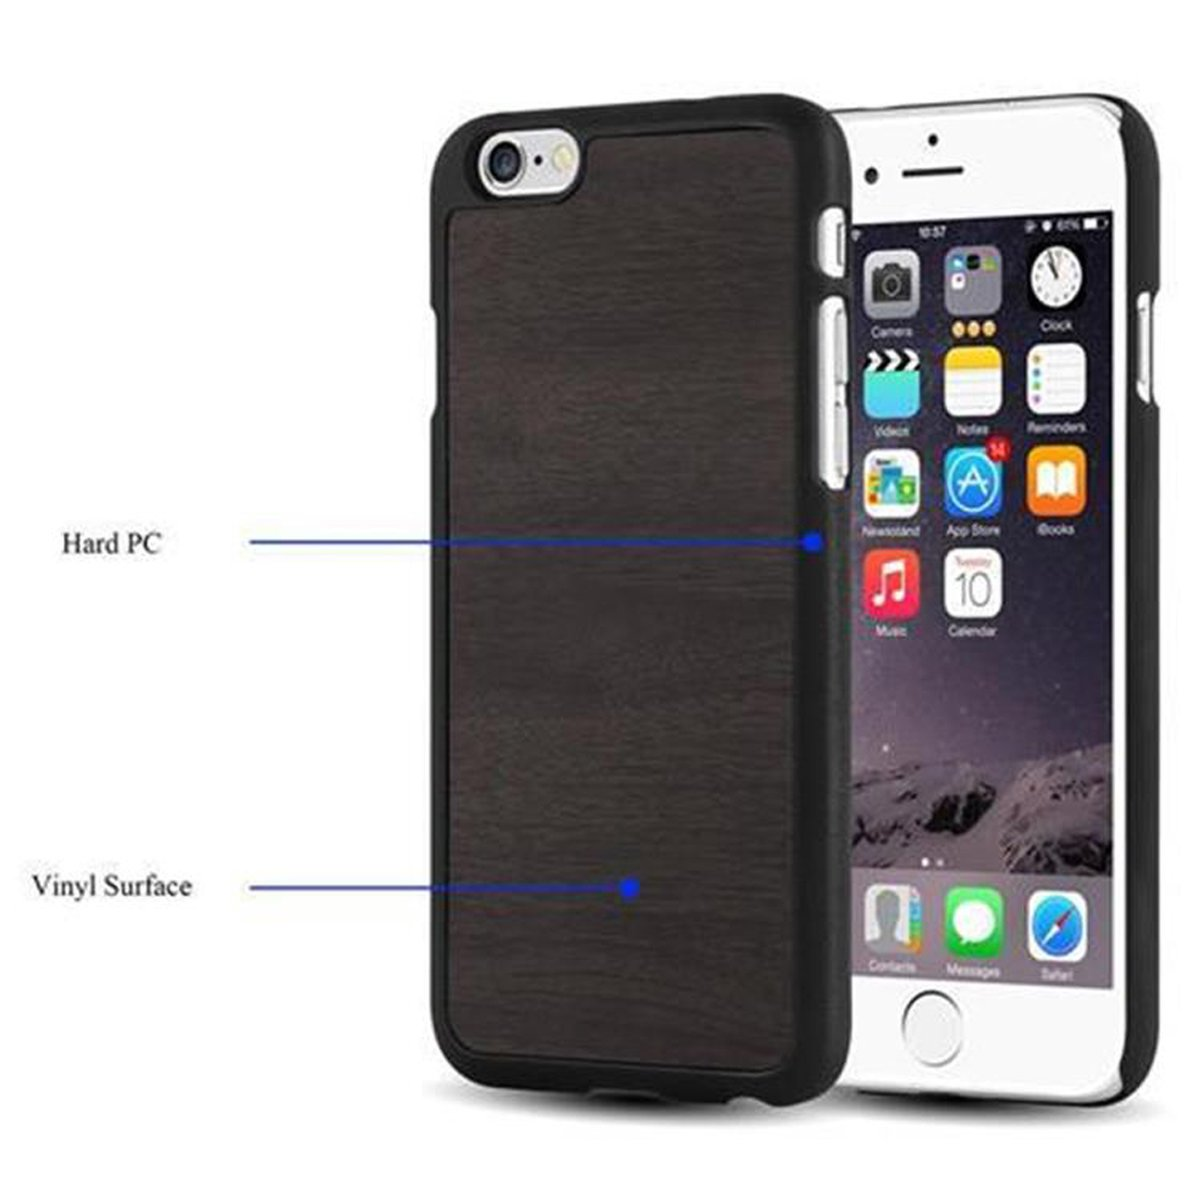 iPhone Woody SCHWARZ / Hard 6S, Apple, CADORABO WOODY Case 6 Backcover, Hülle Style,